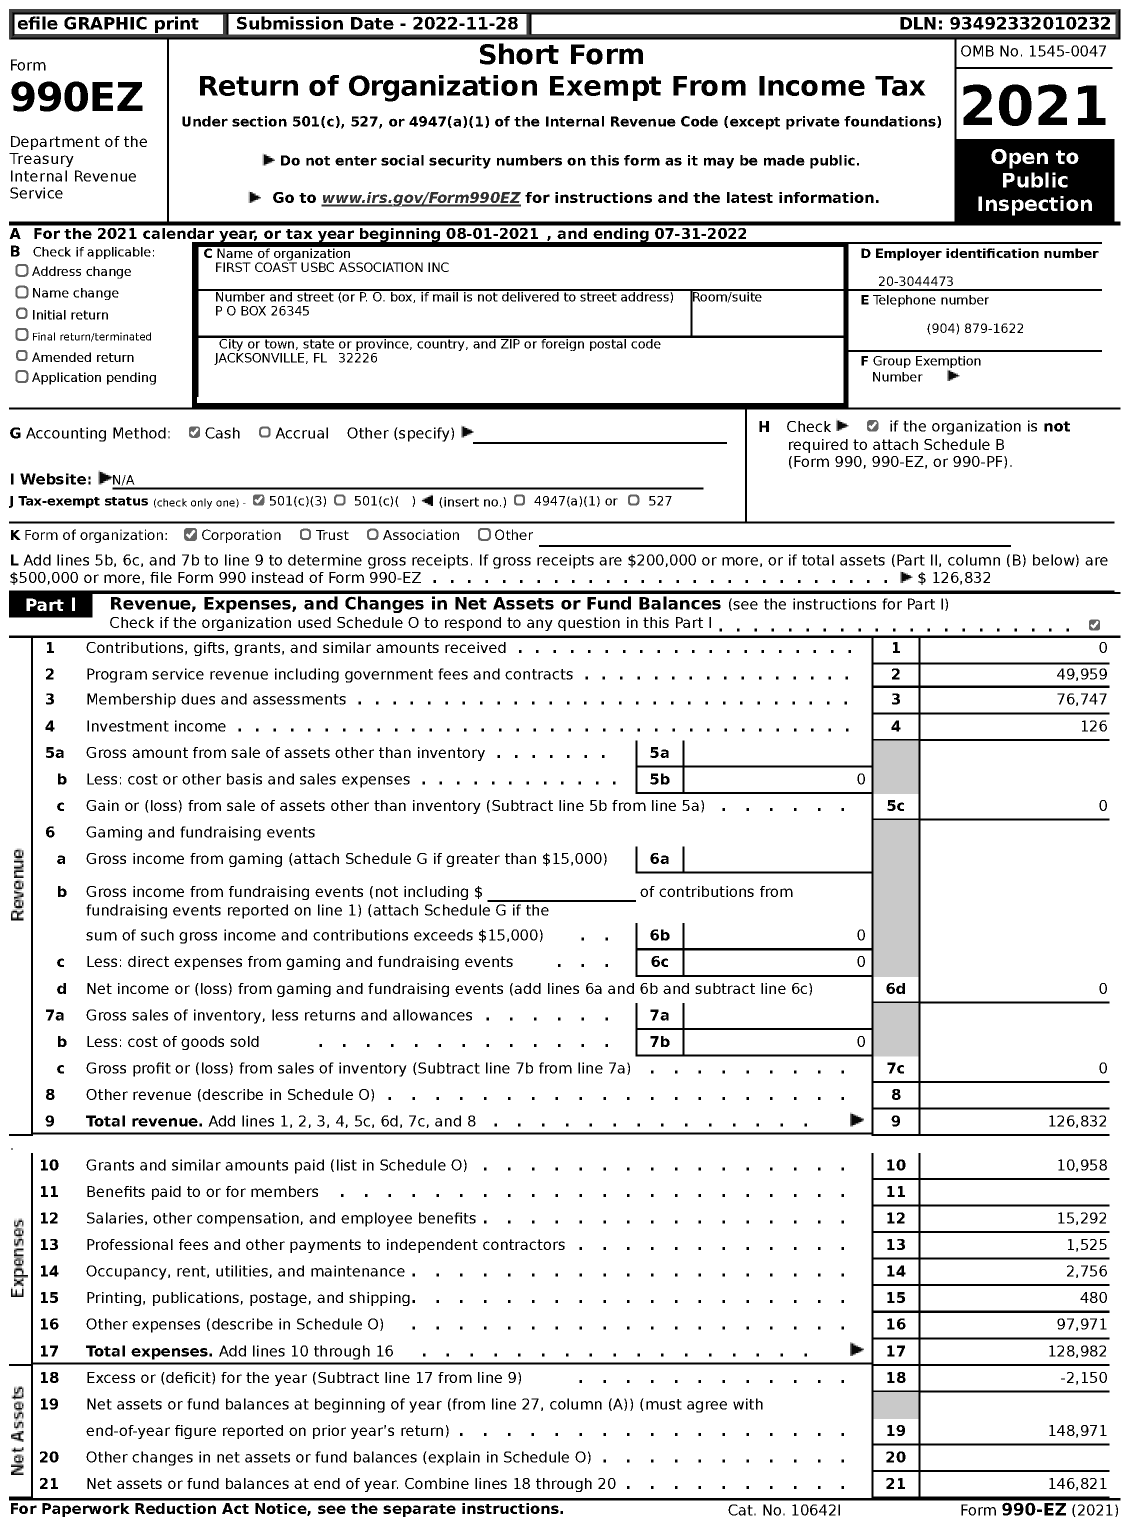 Image of first page of 2021 Form 990EZ for United States Bowling Congress - 82117 First Coast Usbc